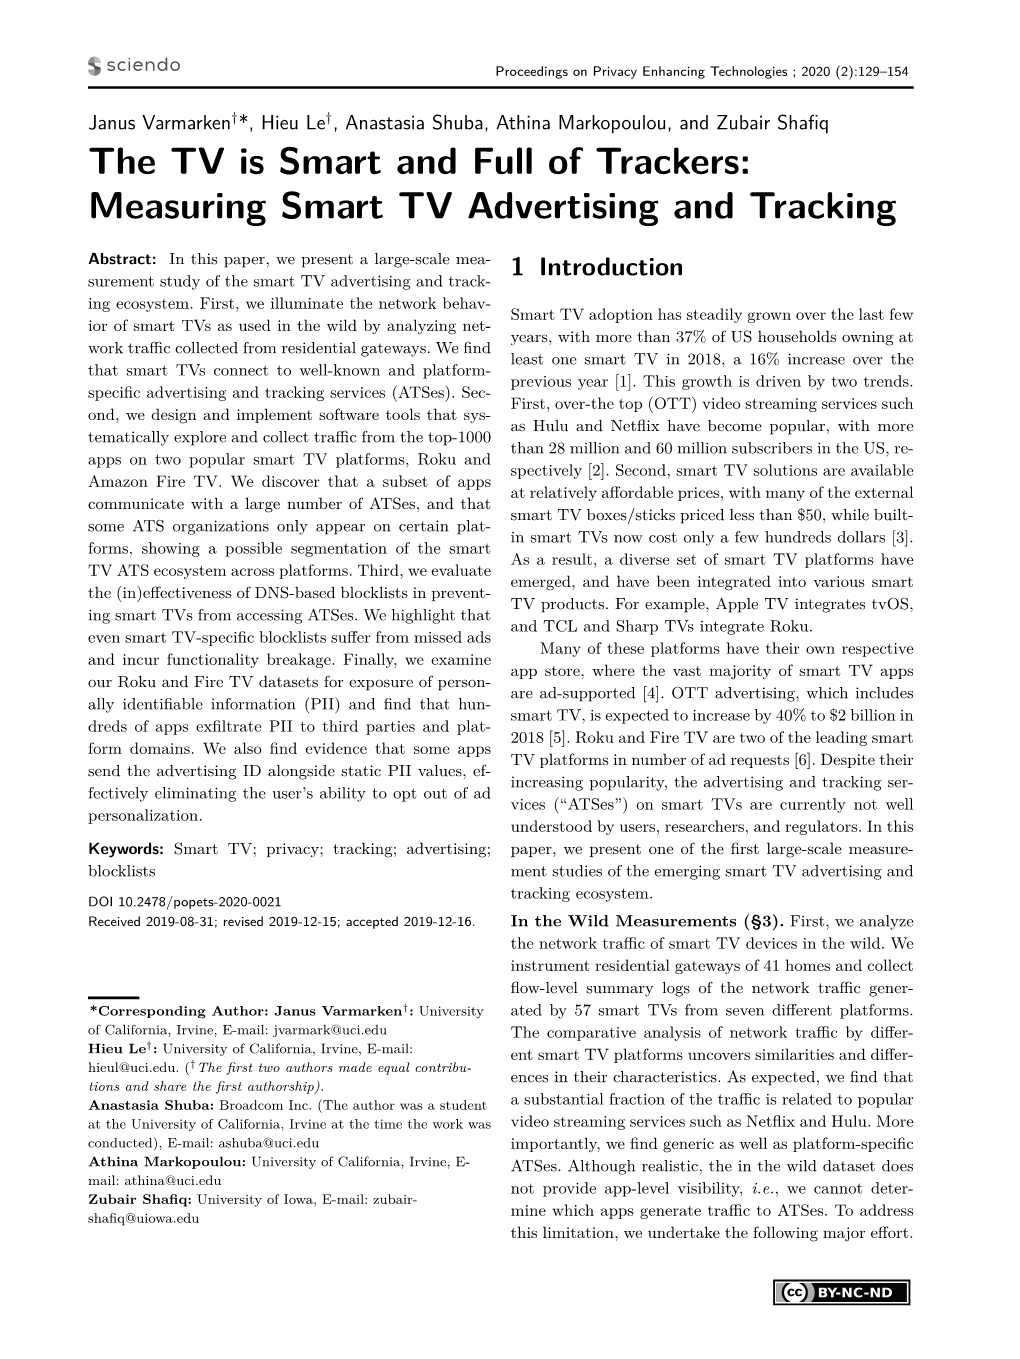 Measuring Smart TV Advertising and Tracking